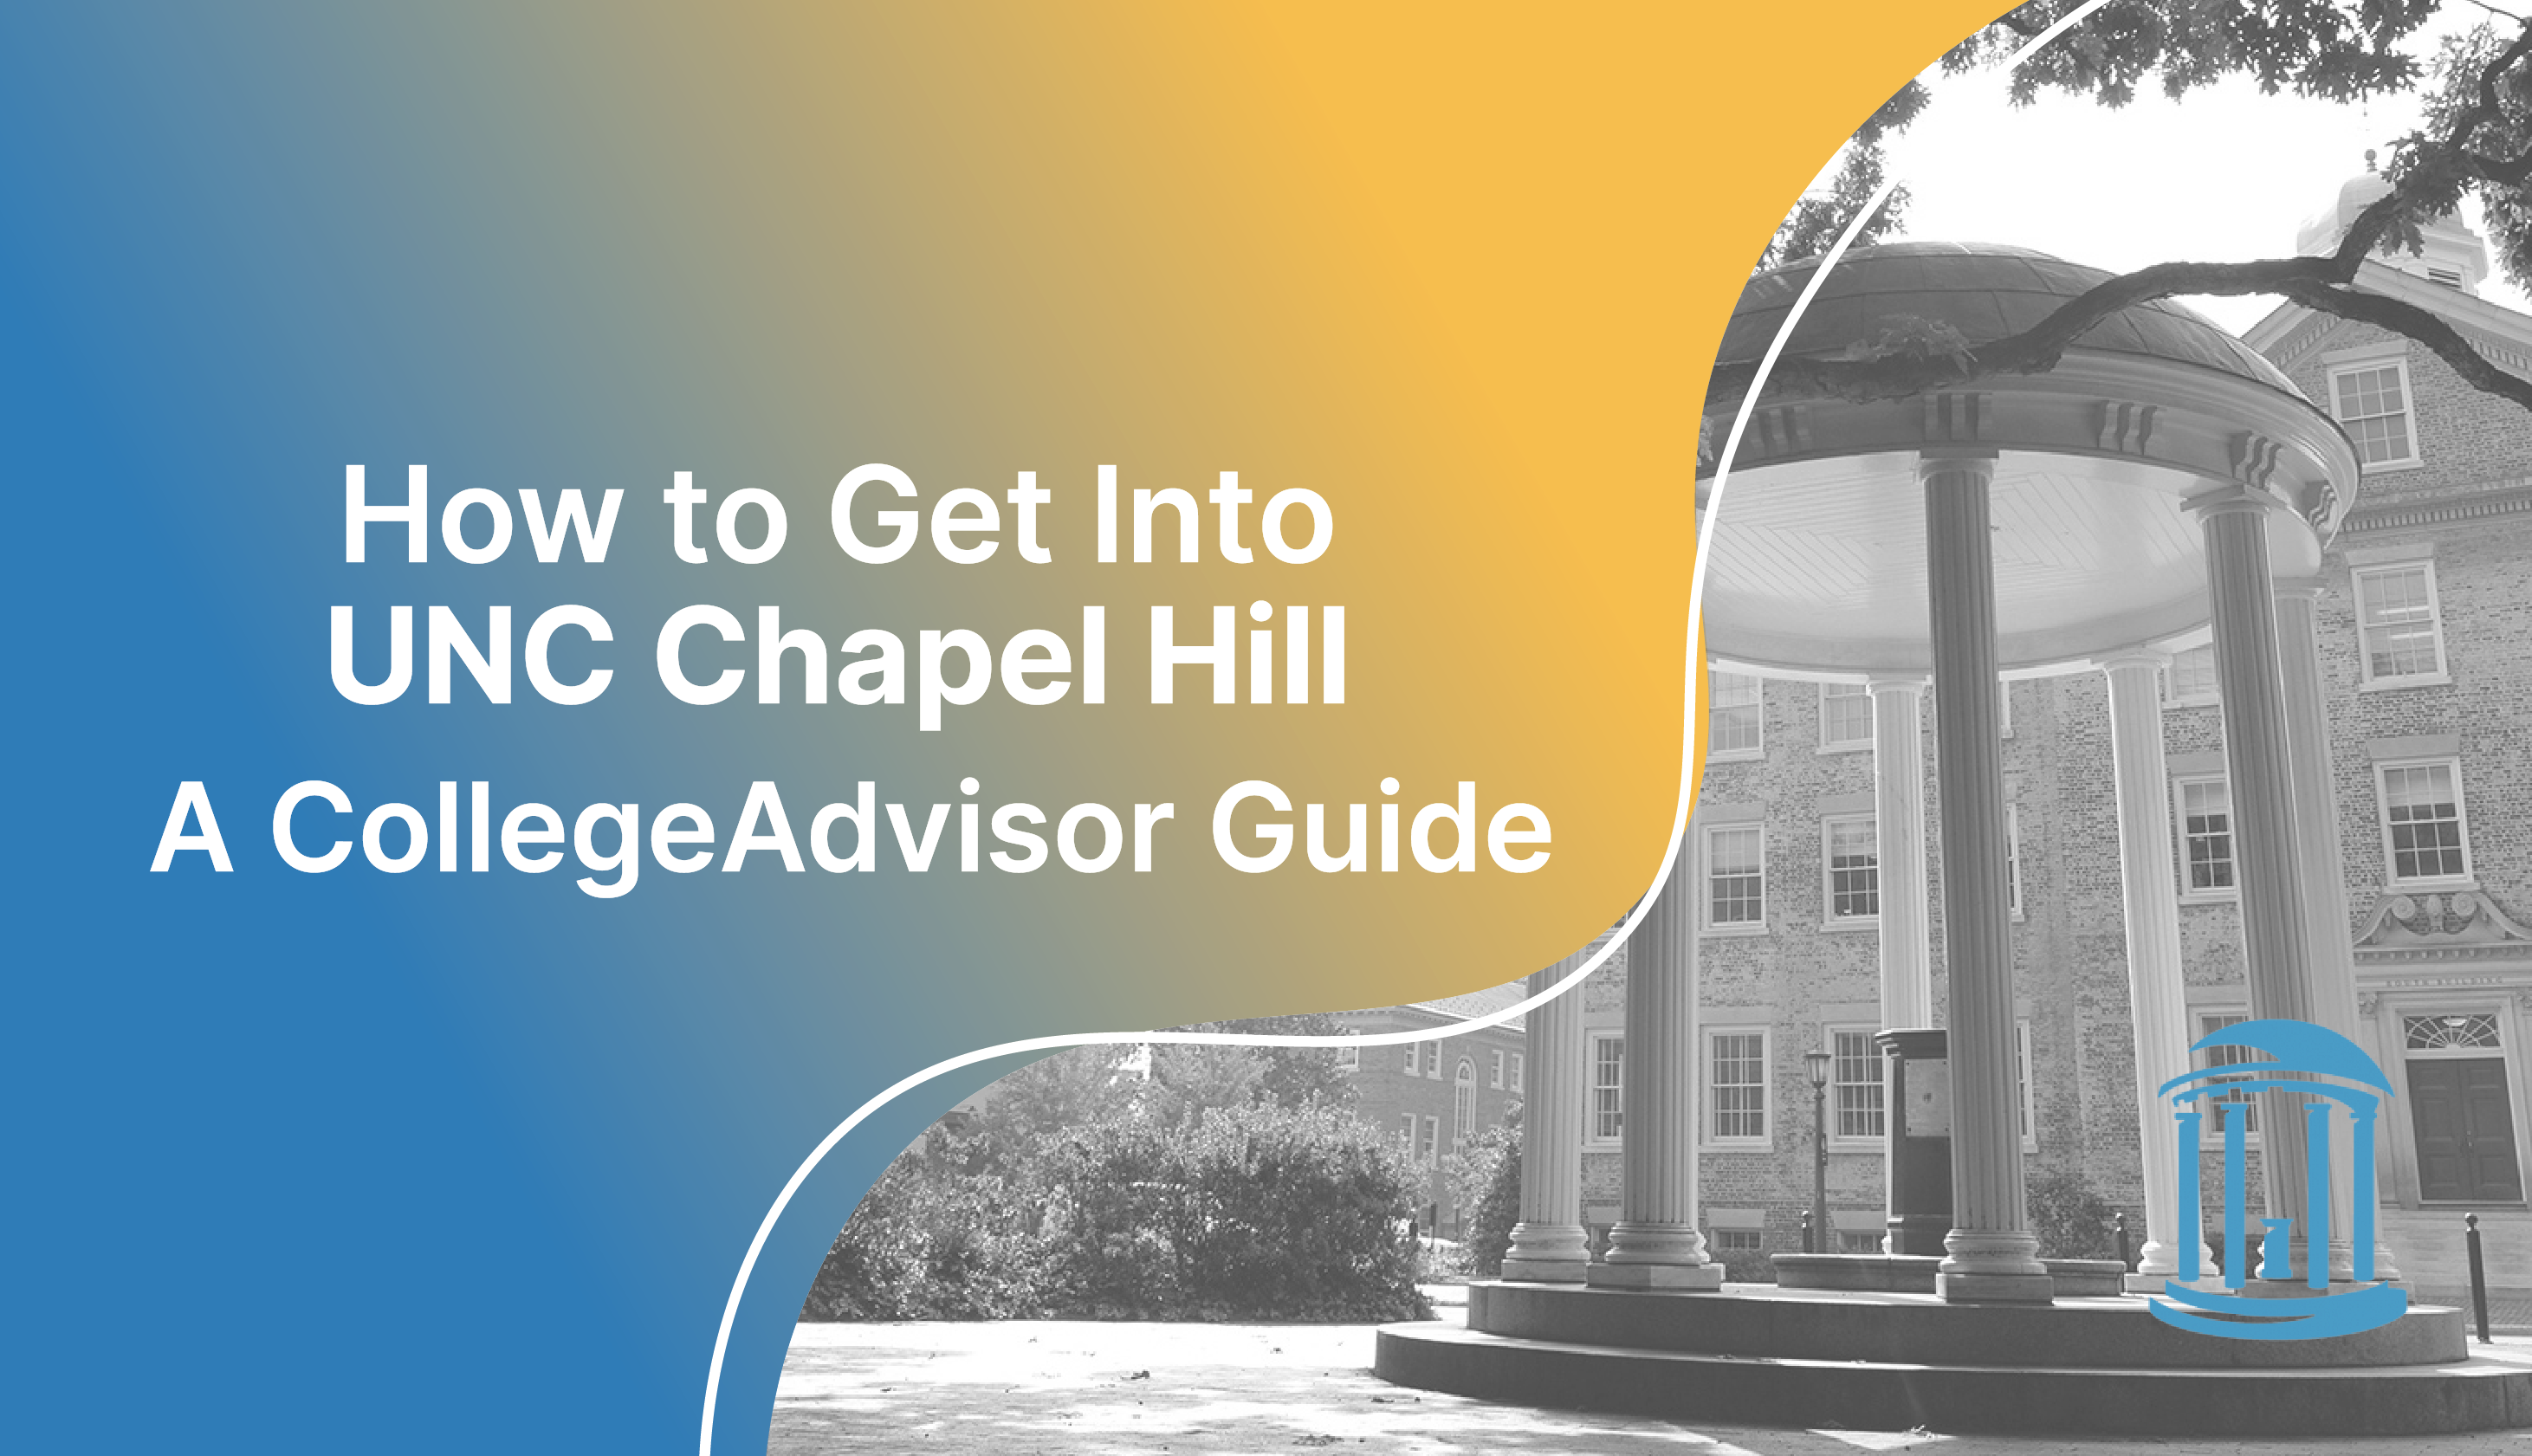 How to Get Into UNC Chapel Hill Guide